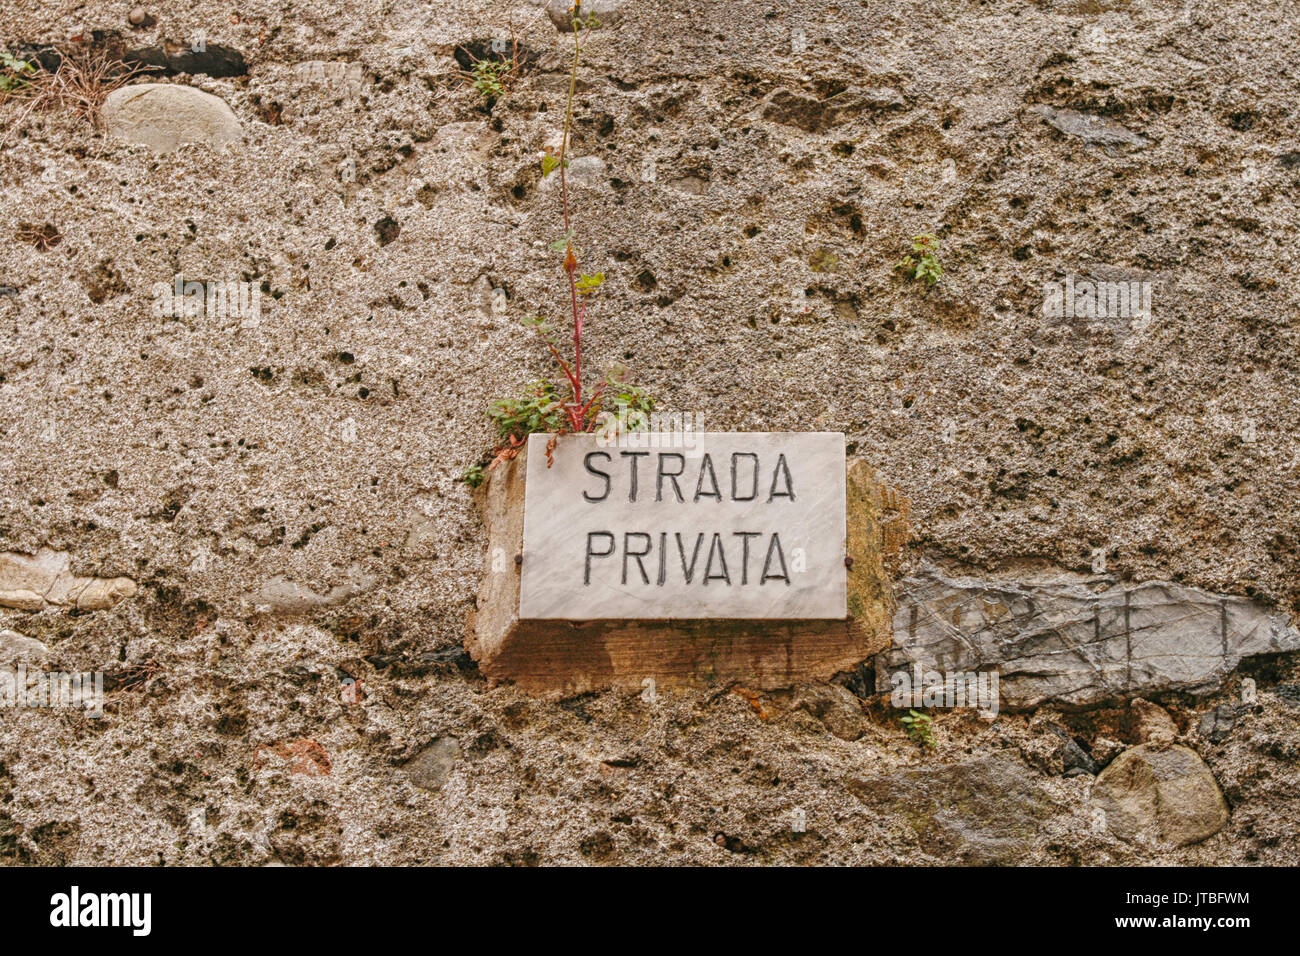 Sign with Italian text for 'private street' Stock Photo